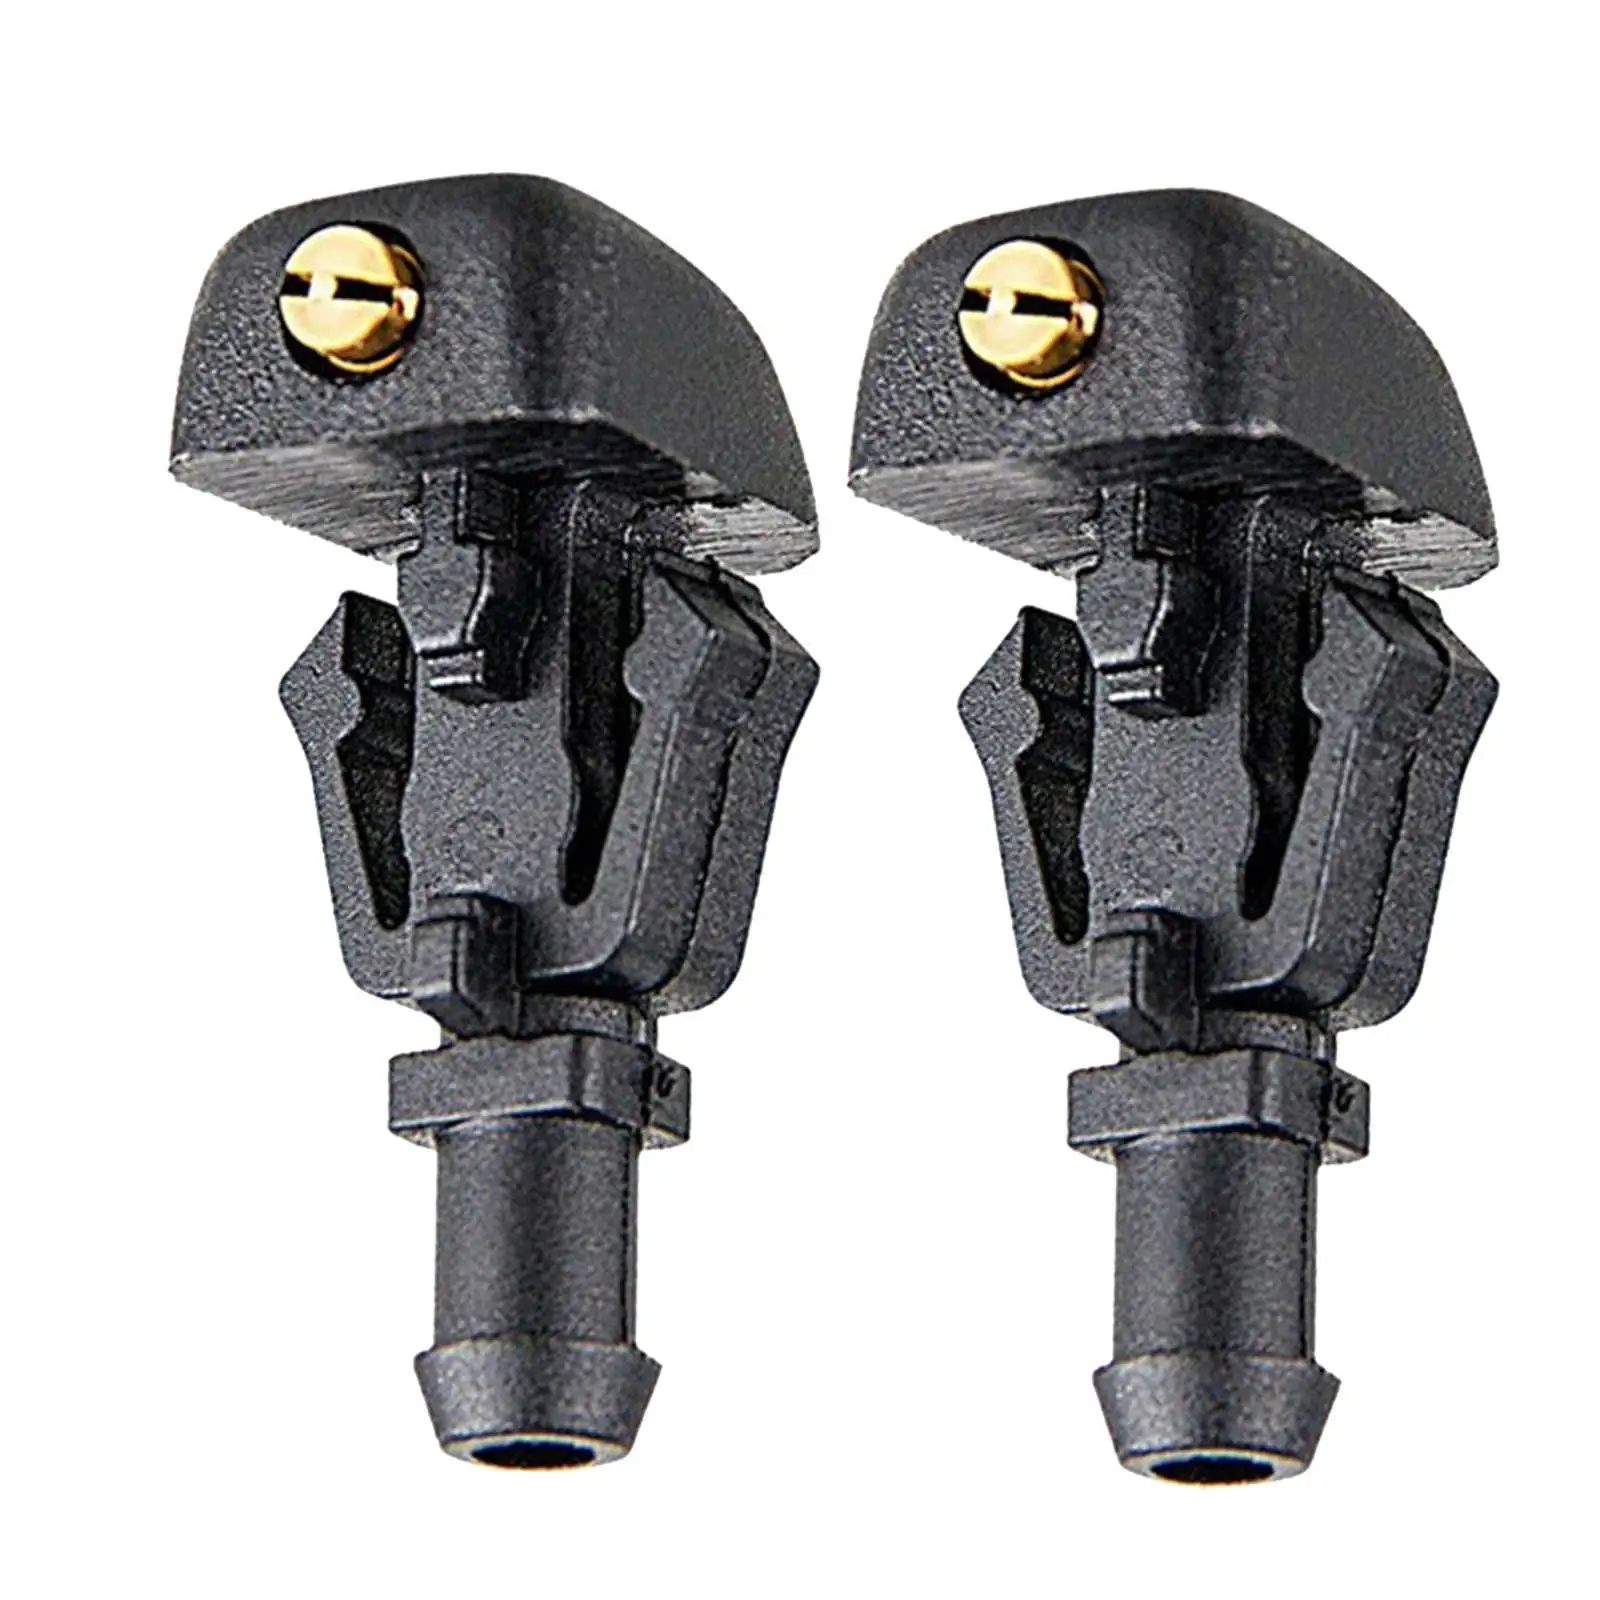 2Pcs Windshield Washer Nozzle Spray Jet Windshield Washer Nozzle for Ford F150 2004 -2014